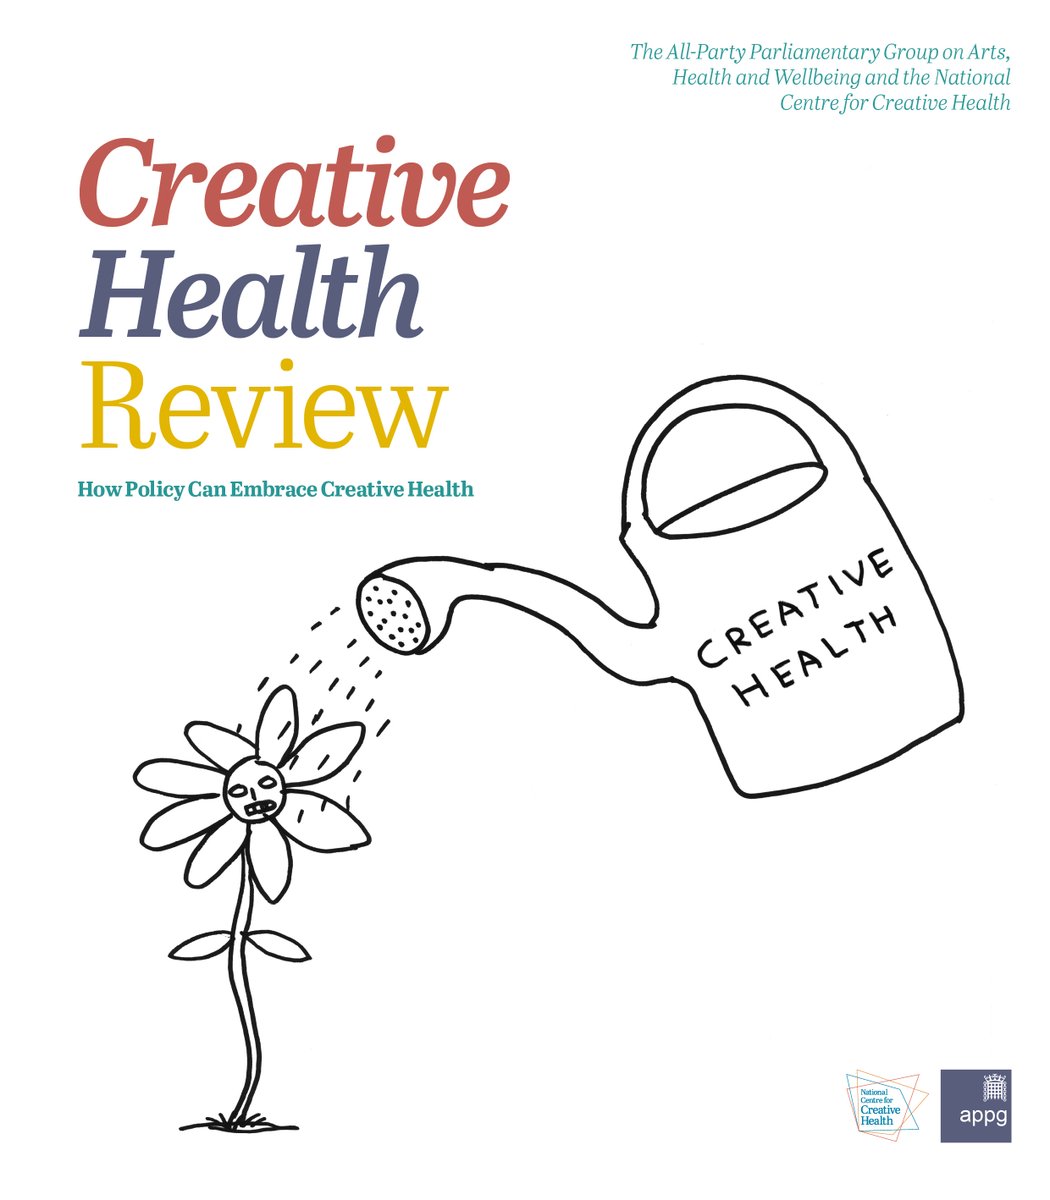 @TheNCCH & All-Party Parliamentary Group on Arts, Health & Wellbeing #CreativeHealthReview report is launching today! Live from @KingsCollegeLon This landmark report offers a set of recommendations on how policy can embrace creative health. Stay tuned ncch.org.uk/creative-healt…